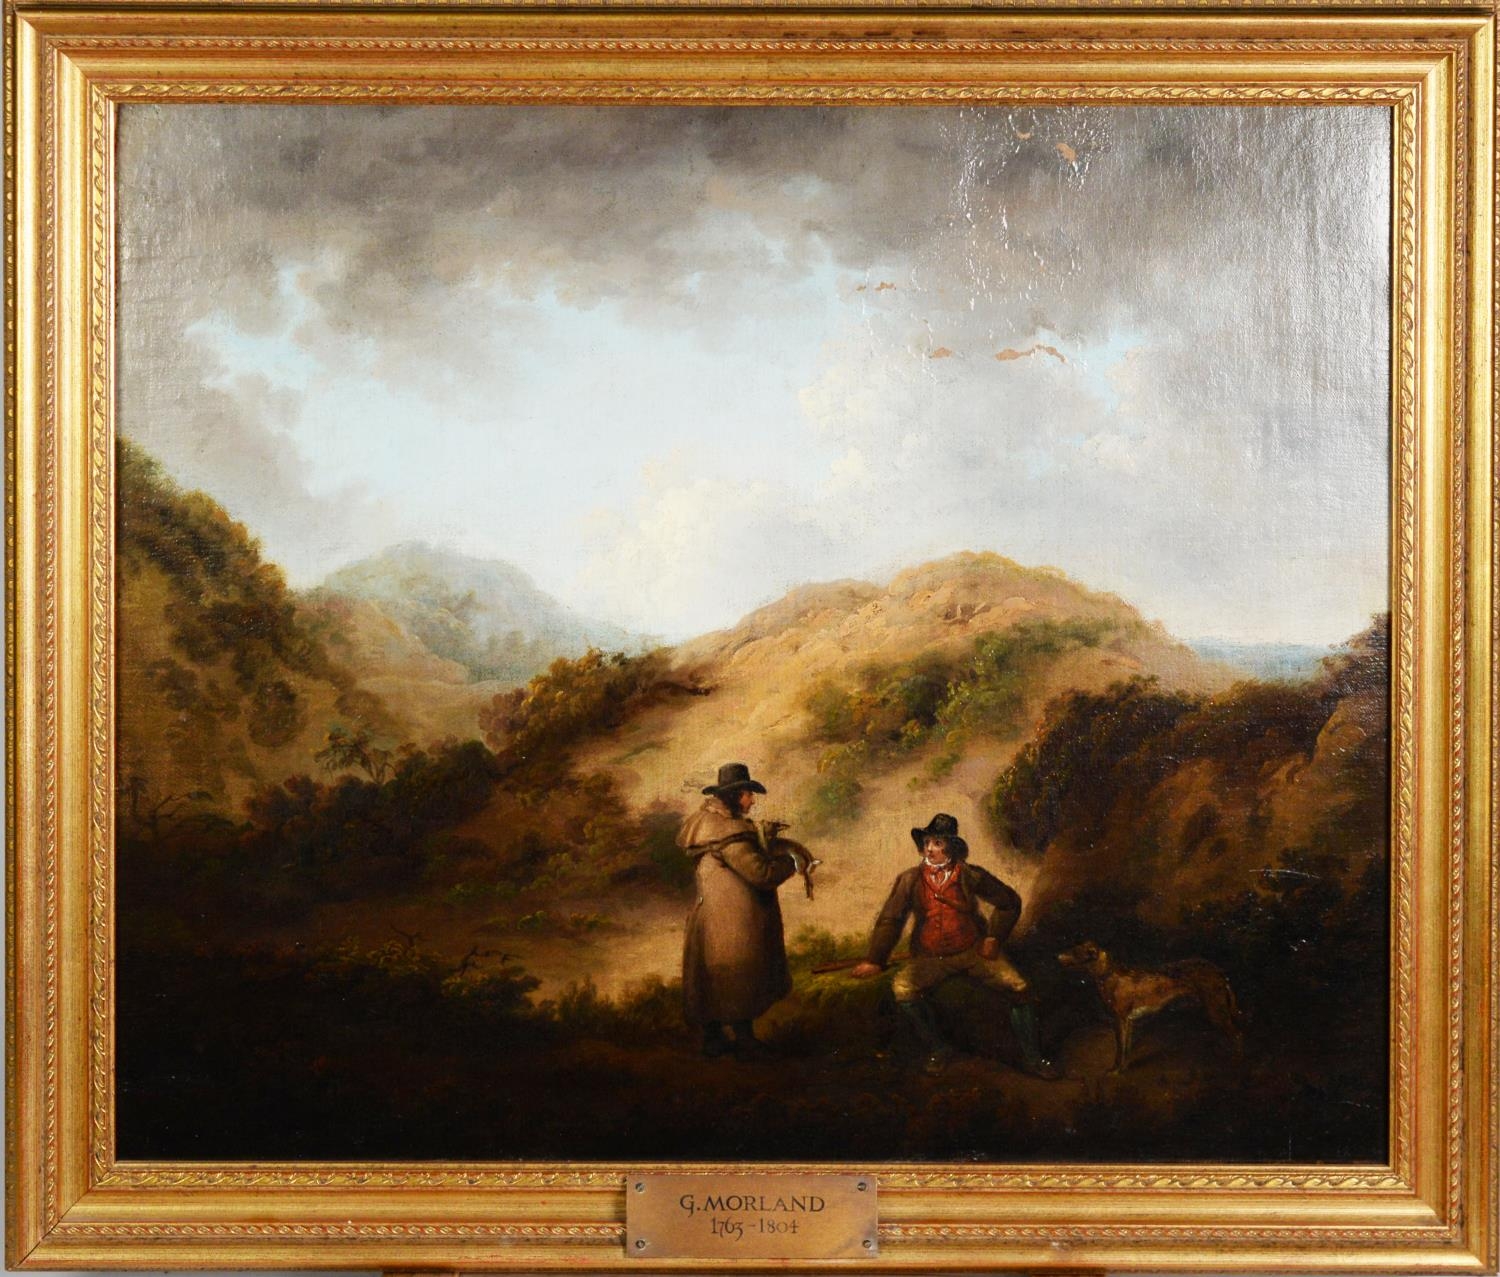 GEORGE MORLAND (1763-1804) OIL PAINTING ON RELINED CANVAS Landscape with two figures - Image 4 of 6